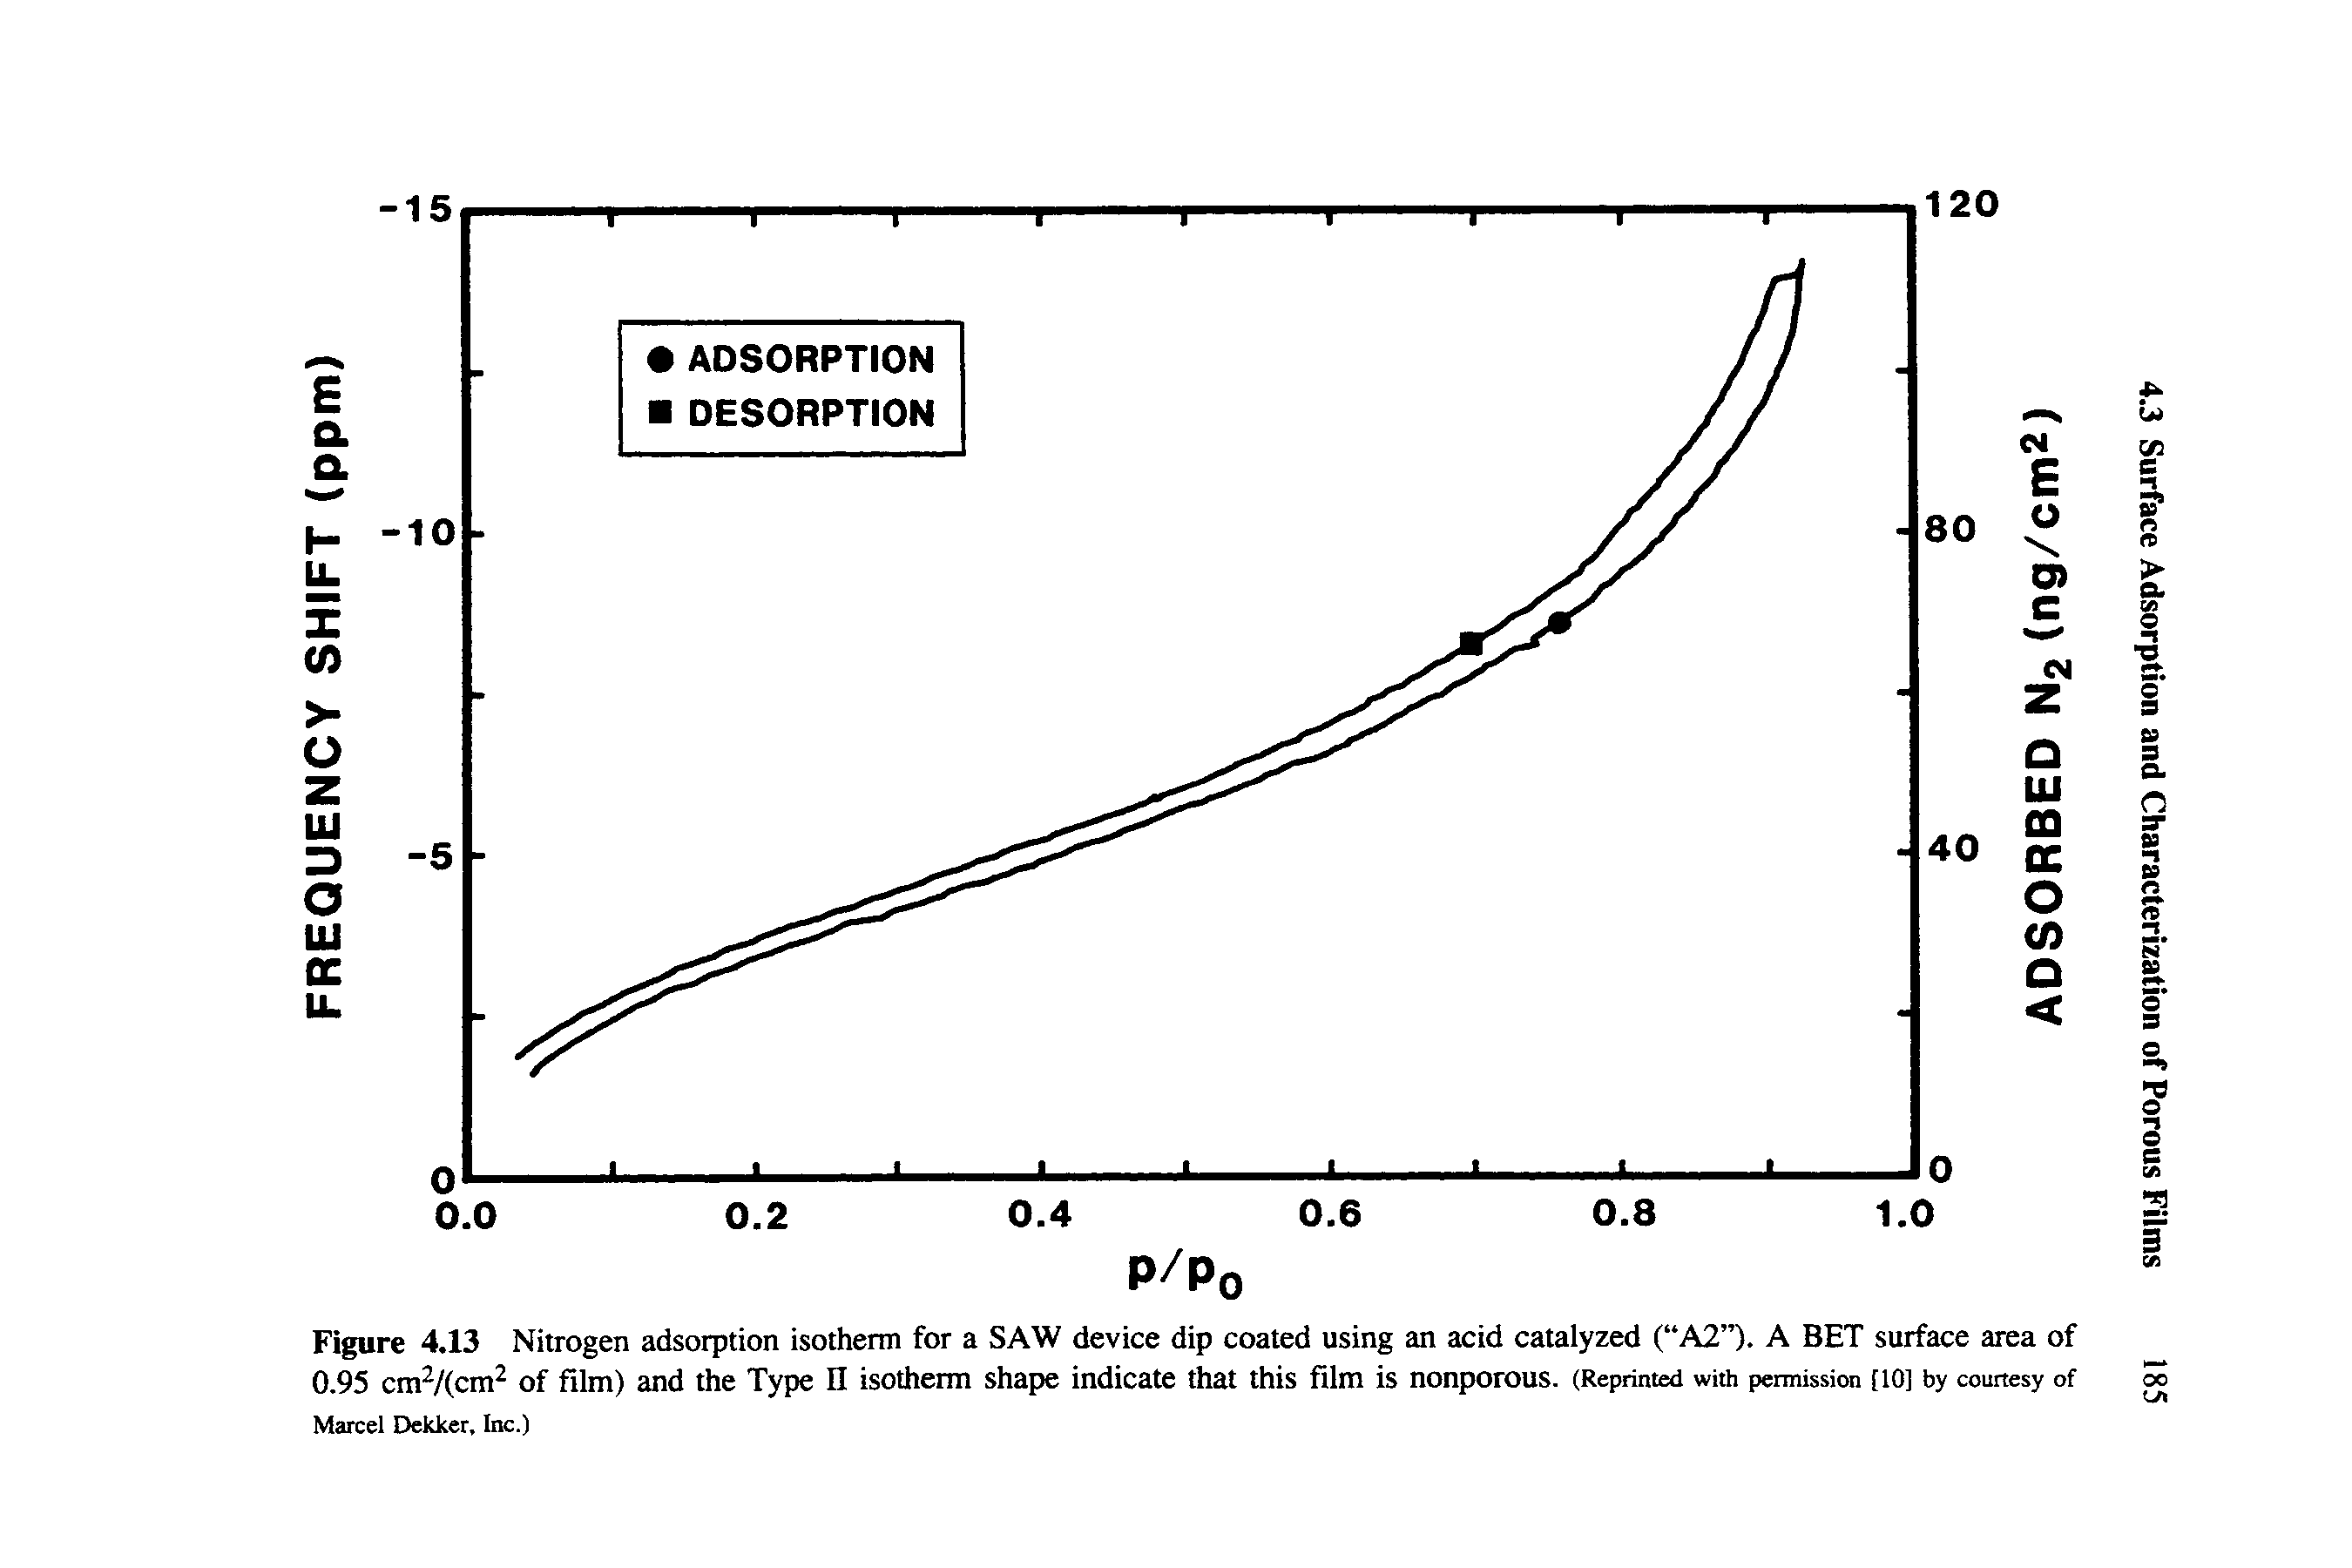 Figure 4.13 Nitrogen adsorption isotherm for a SAW device dip coated using an acid catalyzed ( A2 ). A BET surface area of 0.95 cmV(cm of film) and the Type II isotherm shape indicate that this film is nonporous. (Reprinted with permission [lO] by courtesy of Marcel Dekker, Inc.)...